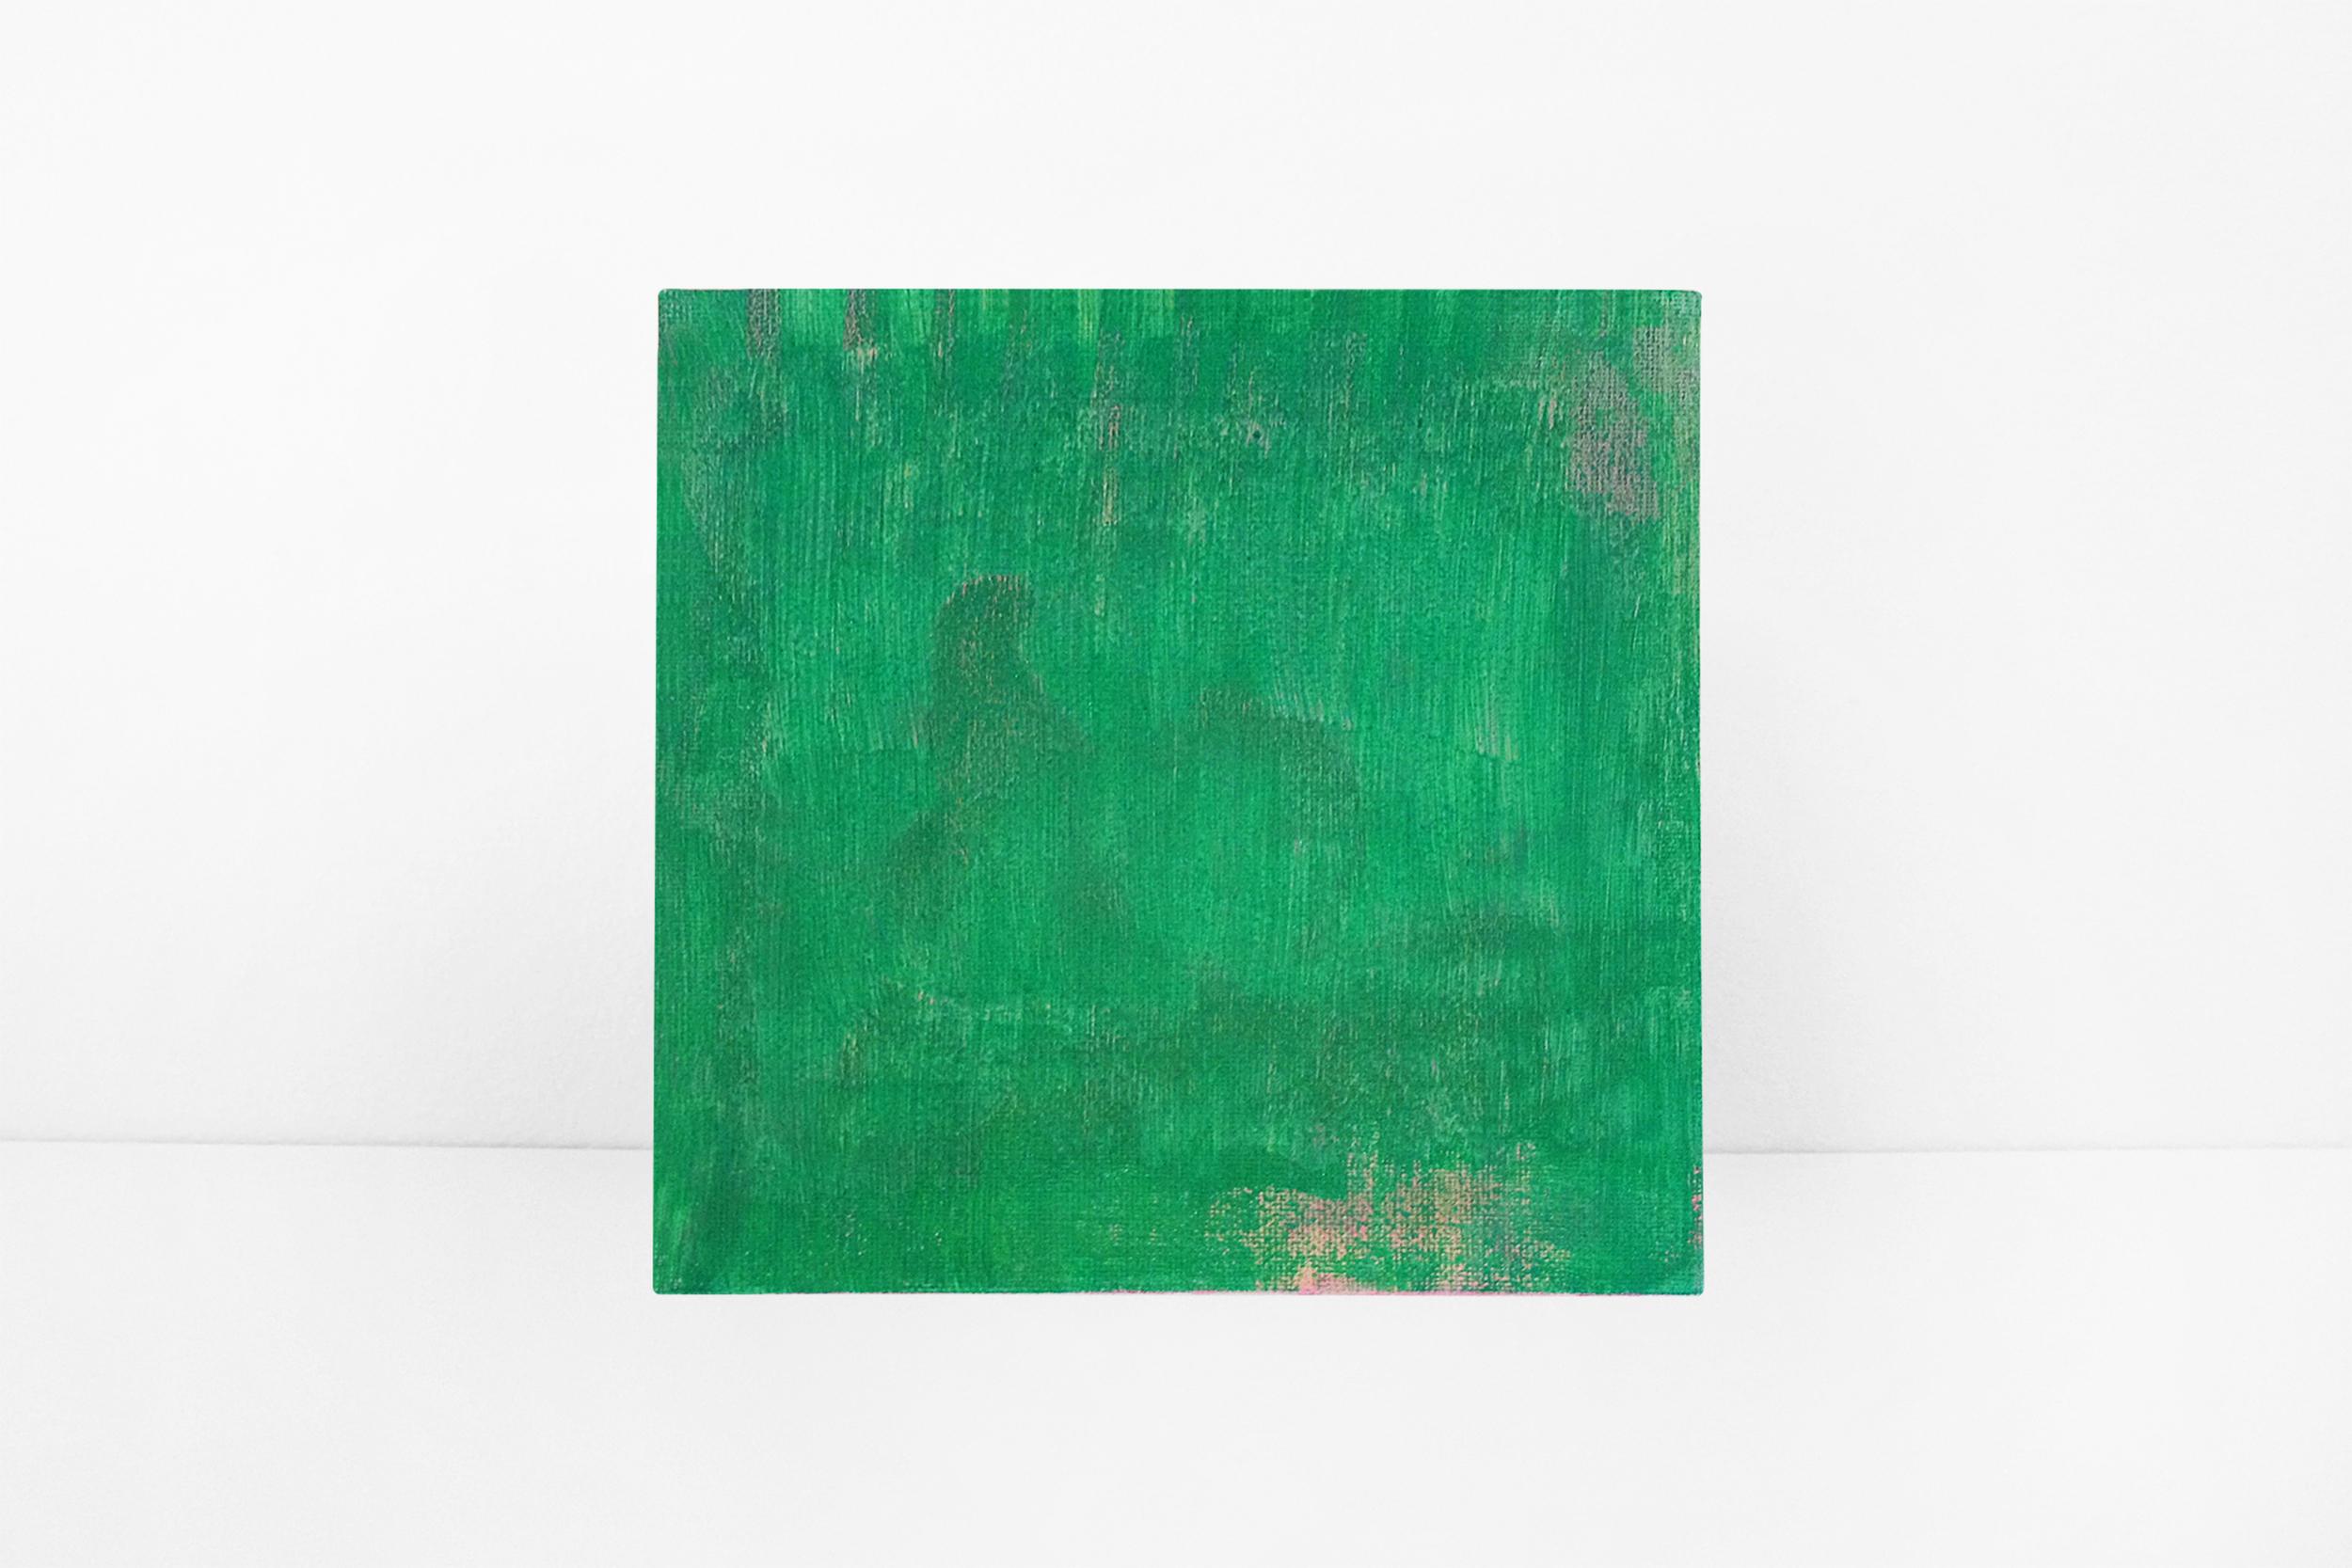  Lush, 2014 paint on canvas 21x21 cm / 8x8 in EAF106    